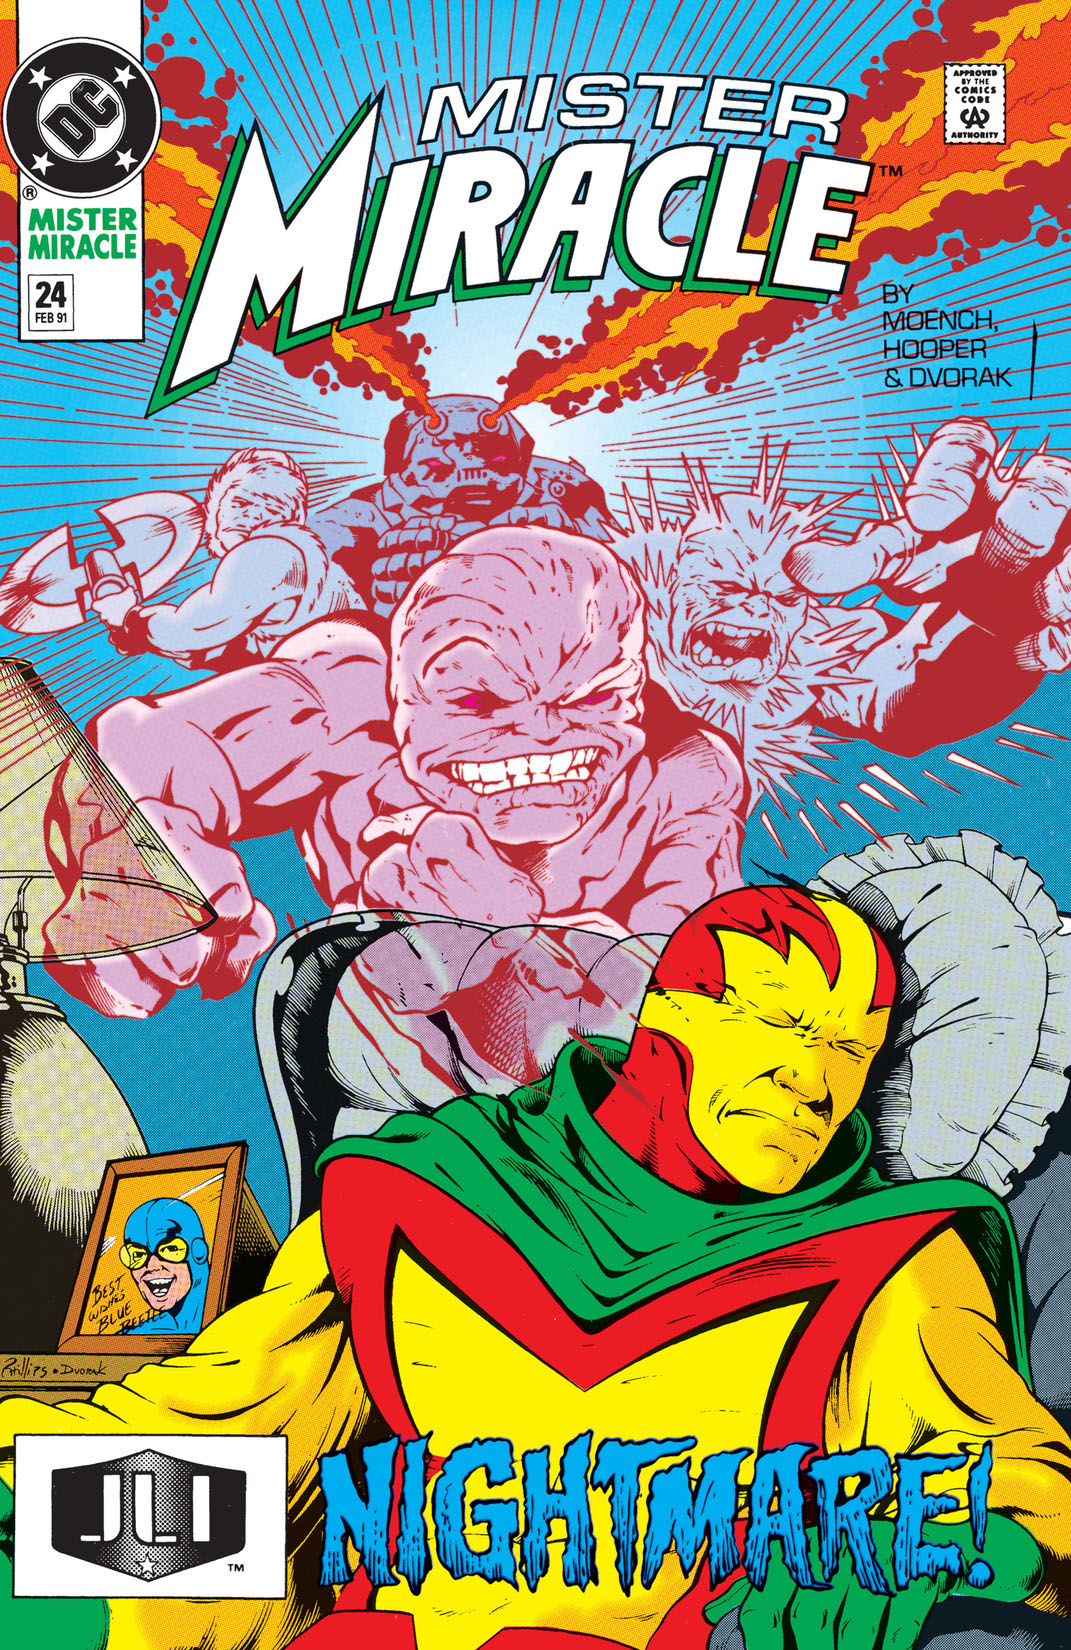 Mister Miracle (1988-) #24 preview images